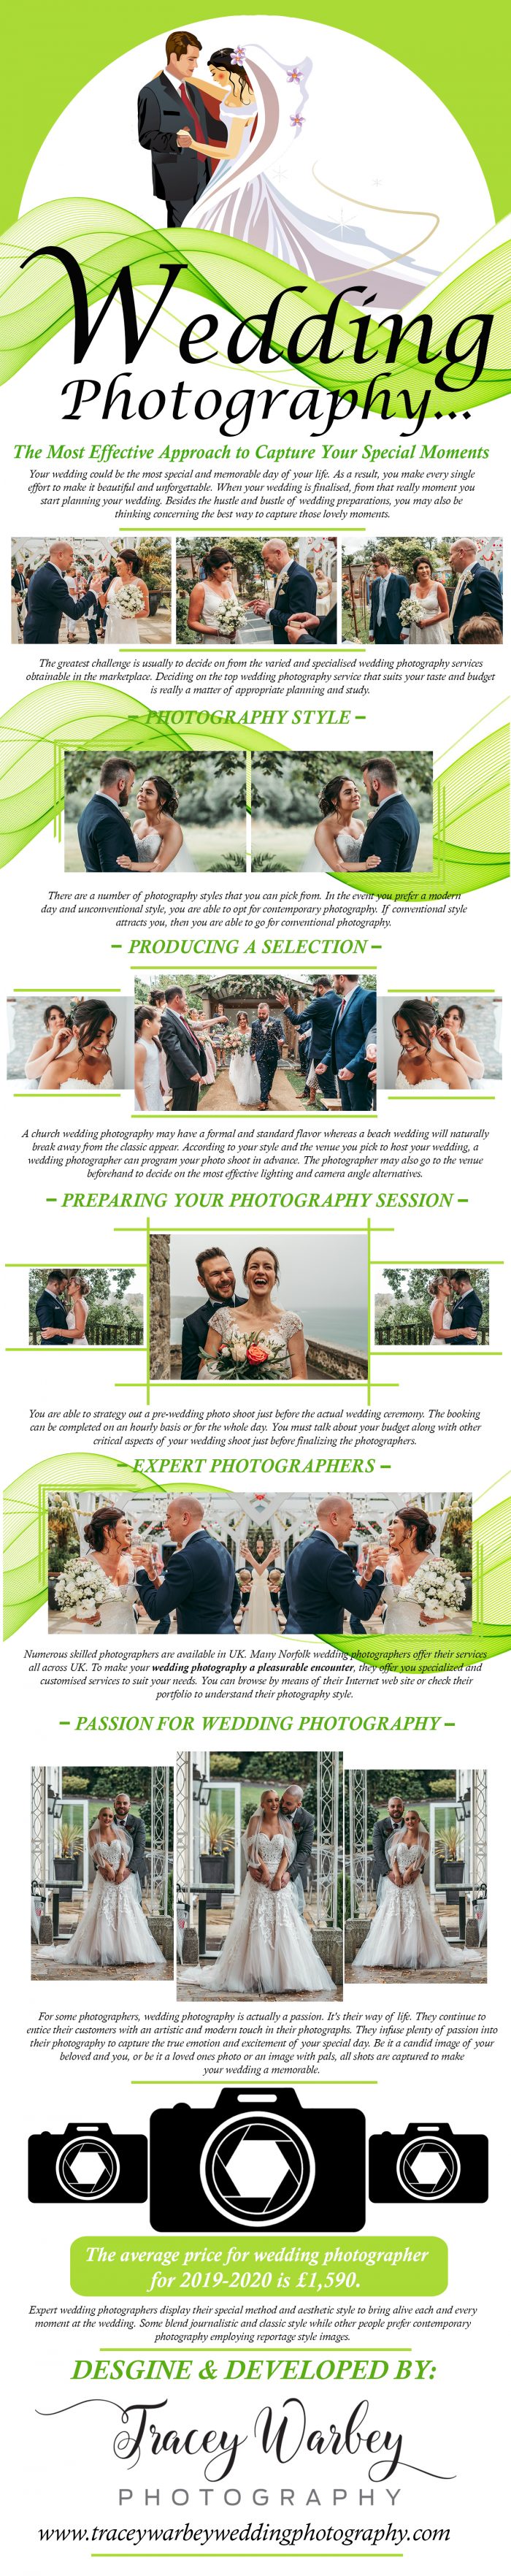 Wedding Photography – The Most Effective Approach to Capture Your Special Moments